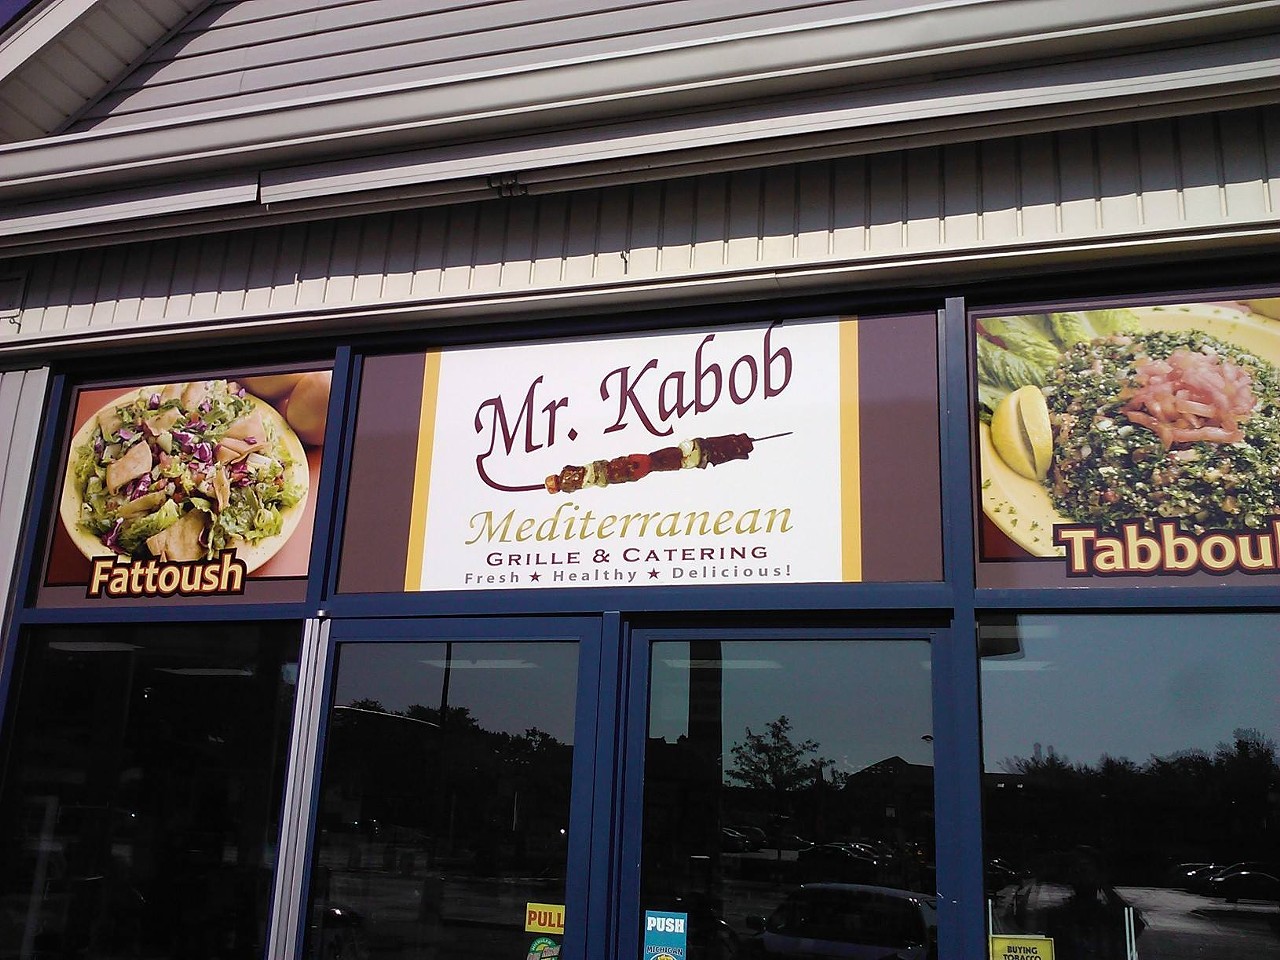 Mr. Kabob 
3372 Coolidge Hwy., Berkley; mrkabob.com
Founded by the Gulli brothers in a Sunoco station in 2003, Mr. Kabob’s Mediterranean fare has become so popular that it has opened additional four Mr. Kabob Xpress locations throughout metro Detroit. —Lee DeVito